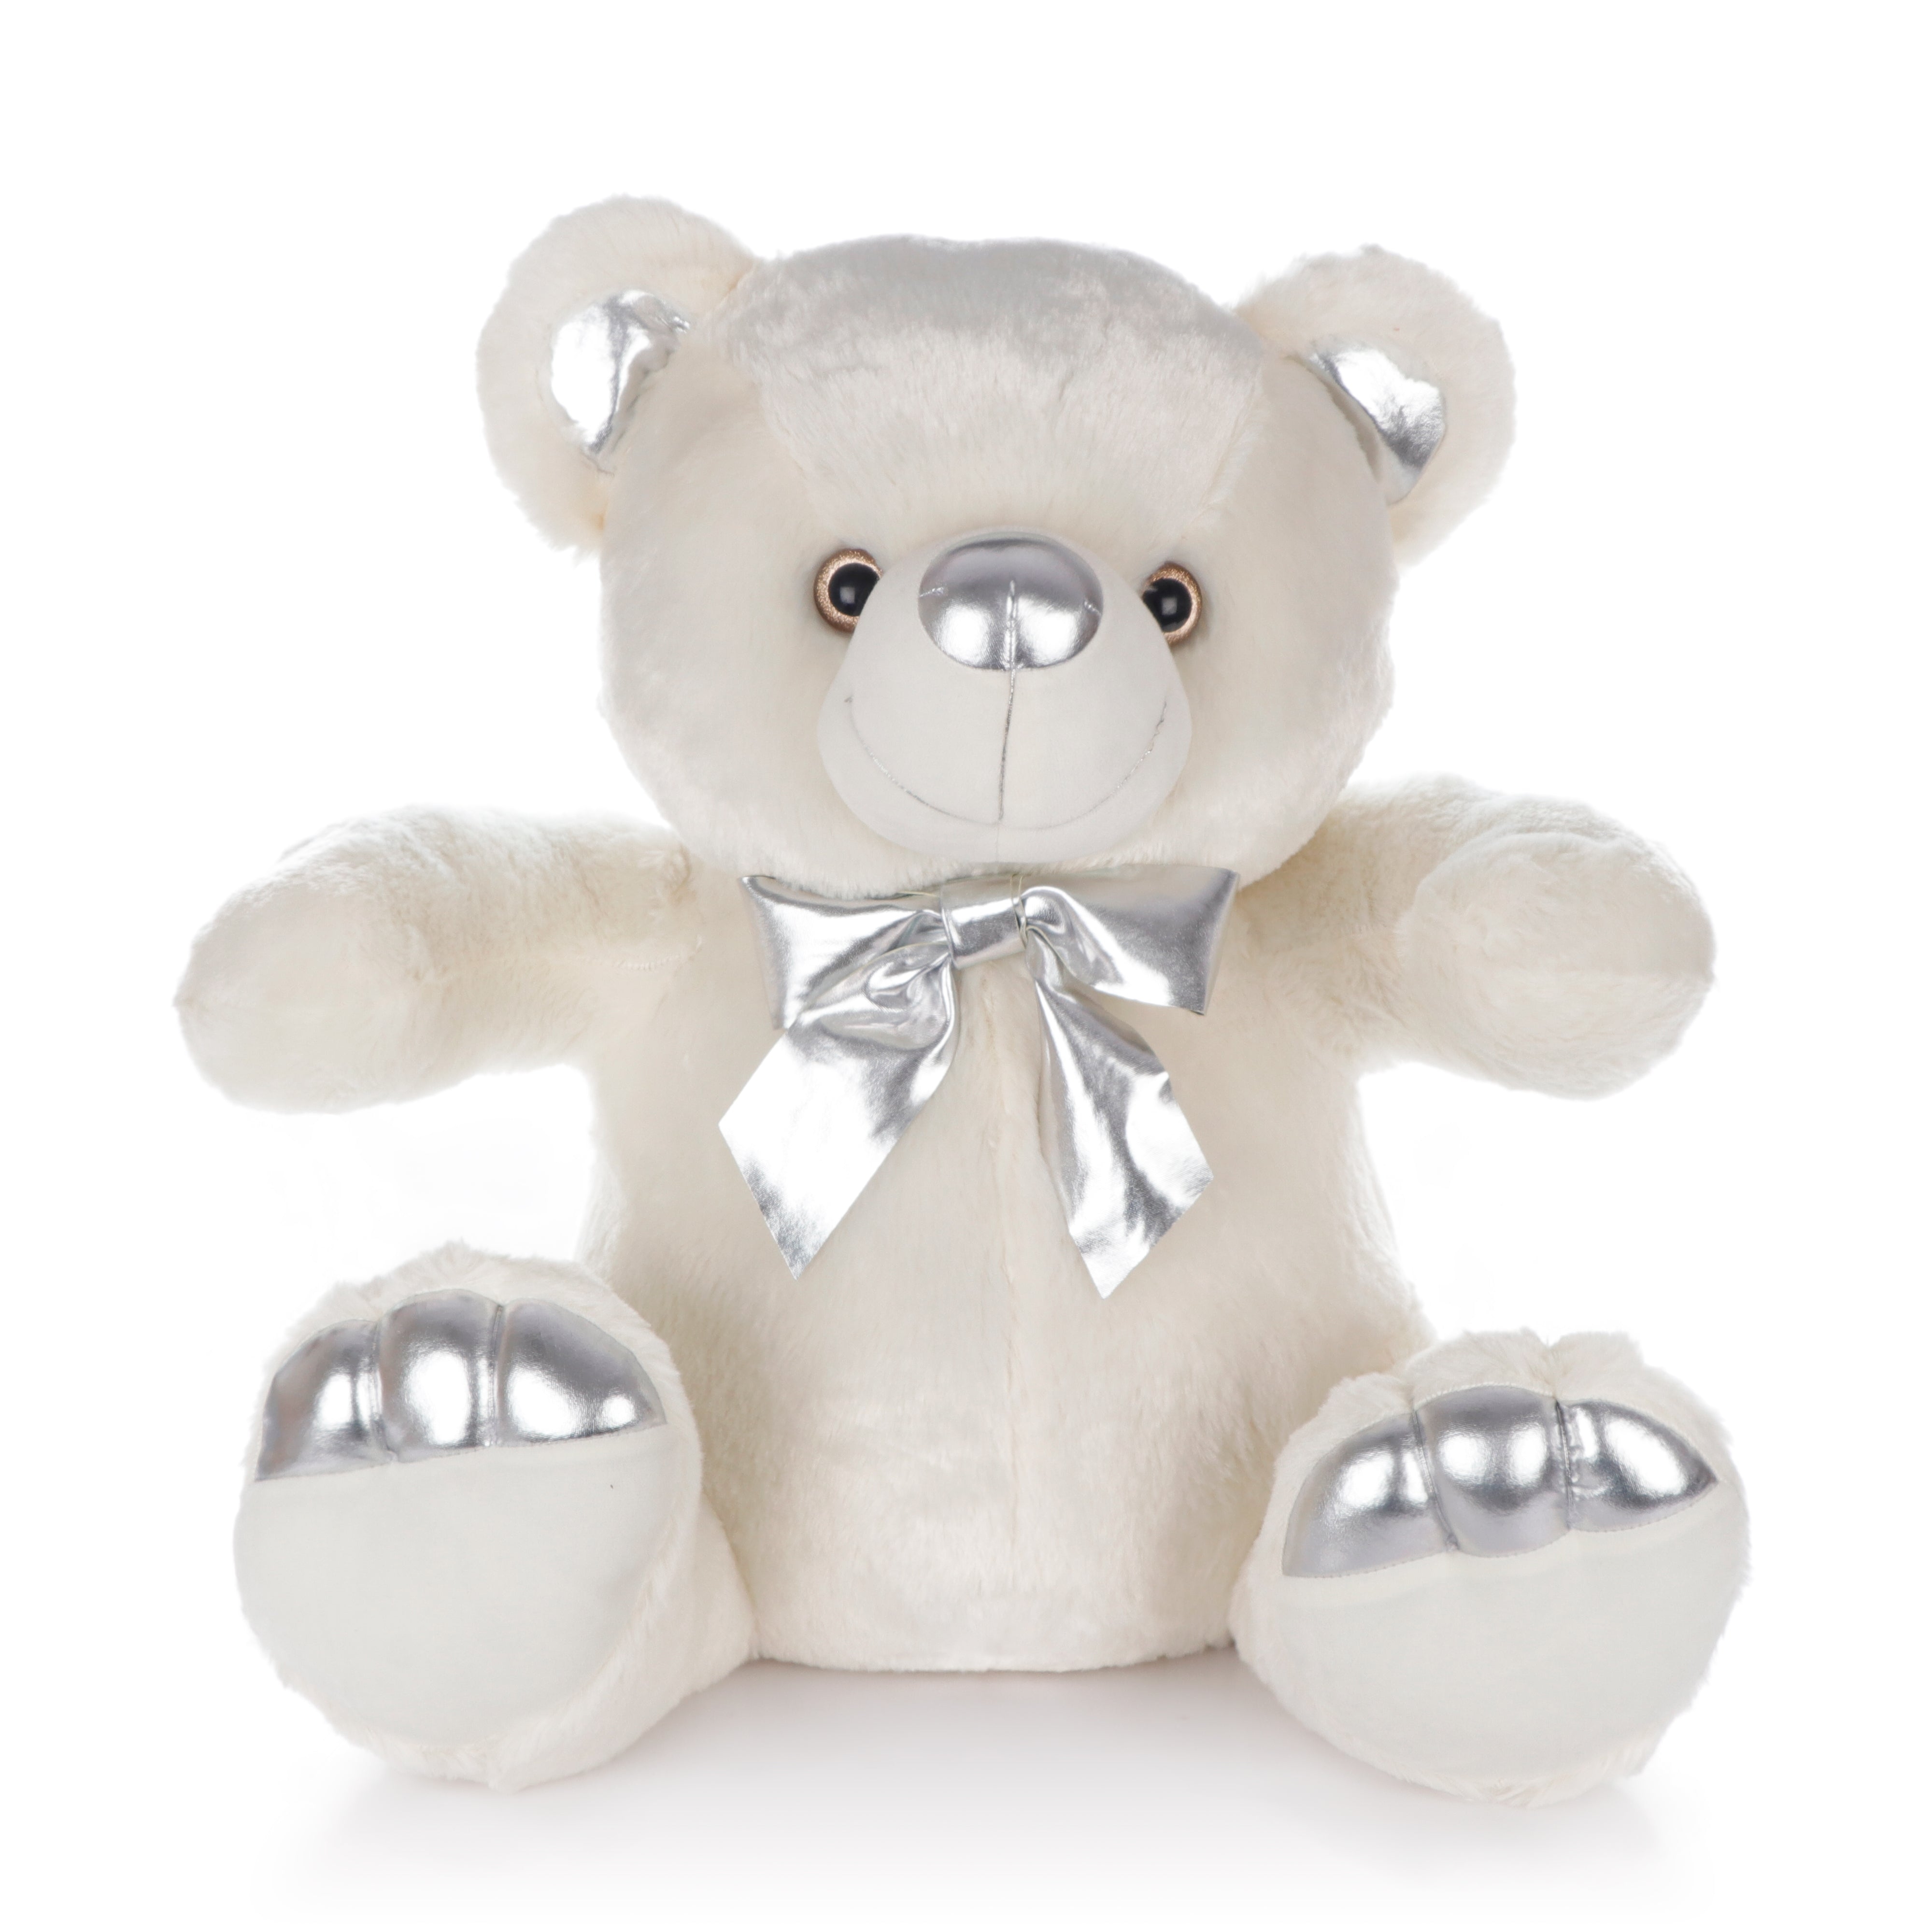 Archies | Archies Soft Toys, Teddy Bear For Girls, Soft Toys Boyfriend, Husband For Kids, Birthday Gift For Girls,Wife,   White Teddy Bear with Golden Paws - 55CM 0